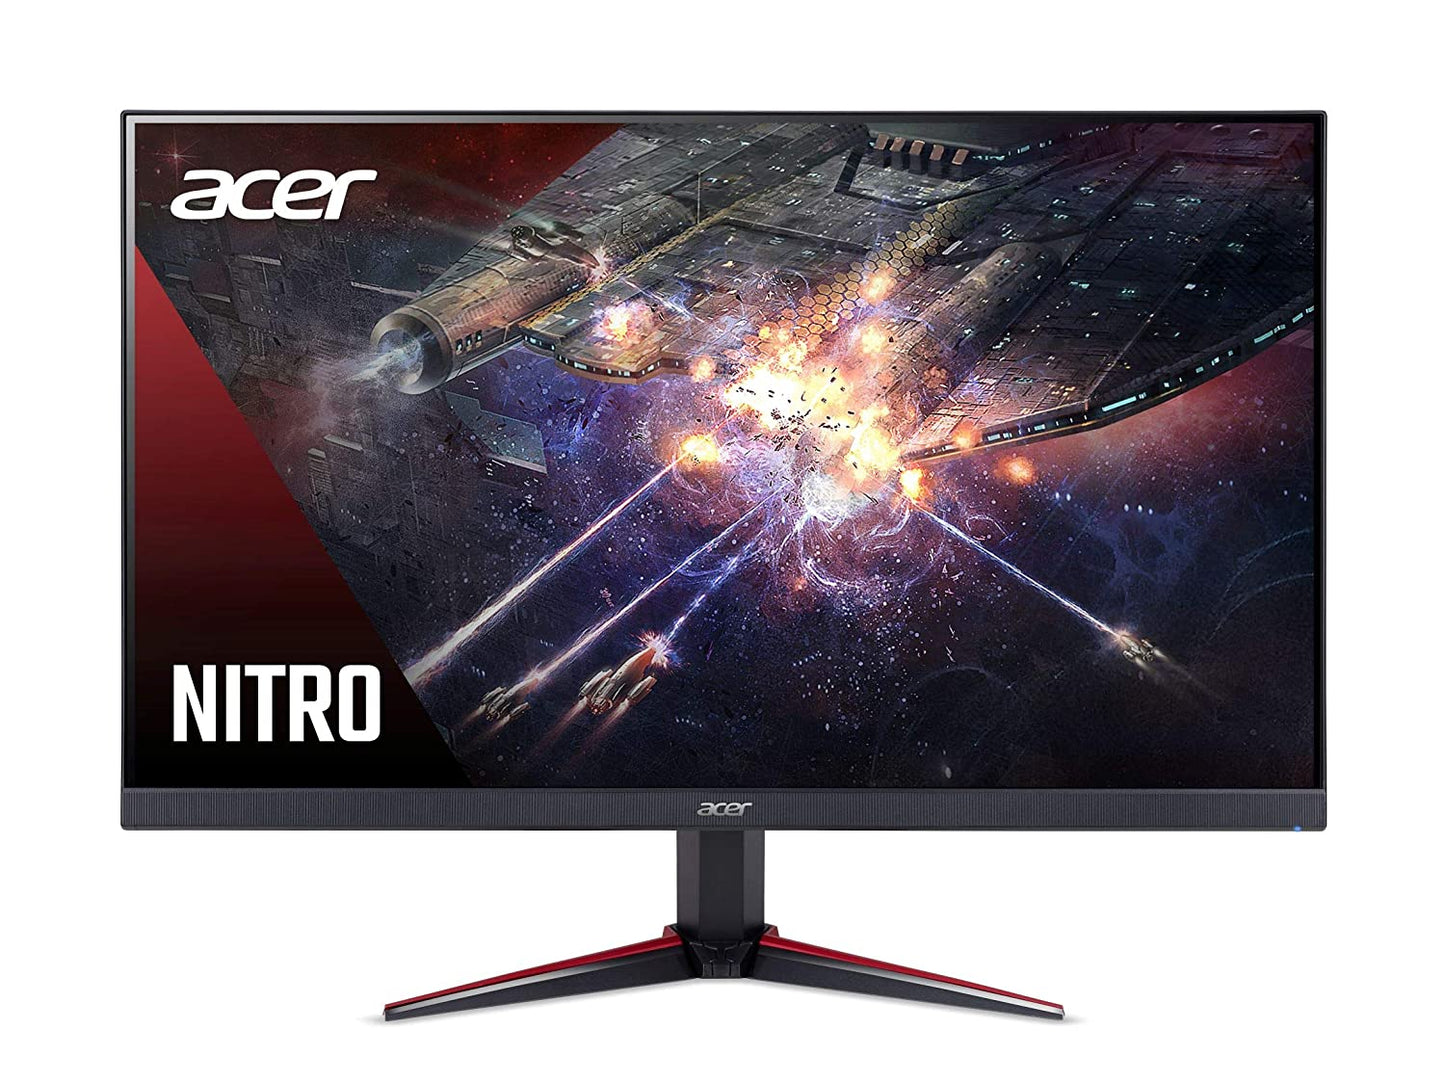 Acer Nitro 23.8 inch Full HD 1920 x 1080-0.1 MS Response Time - 165 Hz Refresh Rate IPS Gaming Monitor